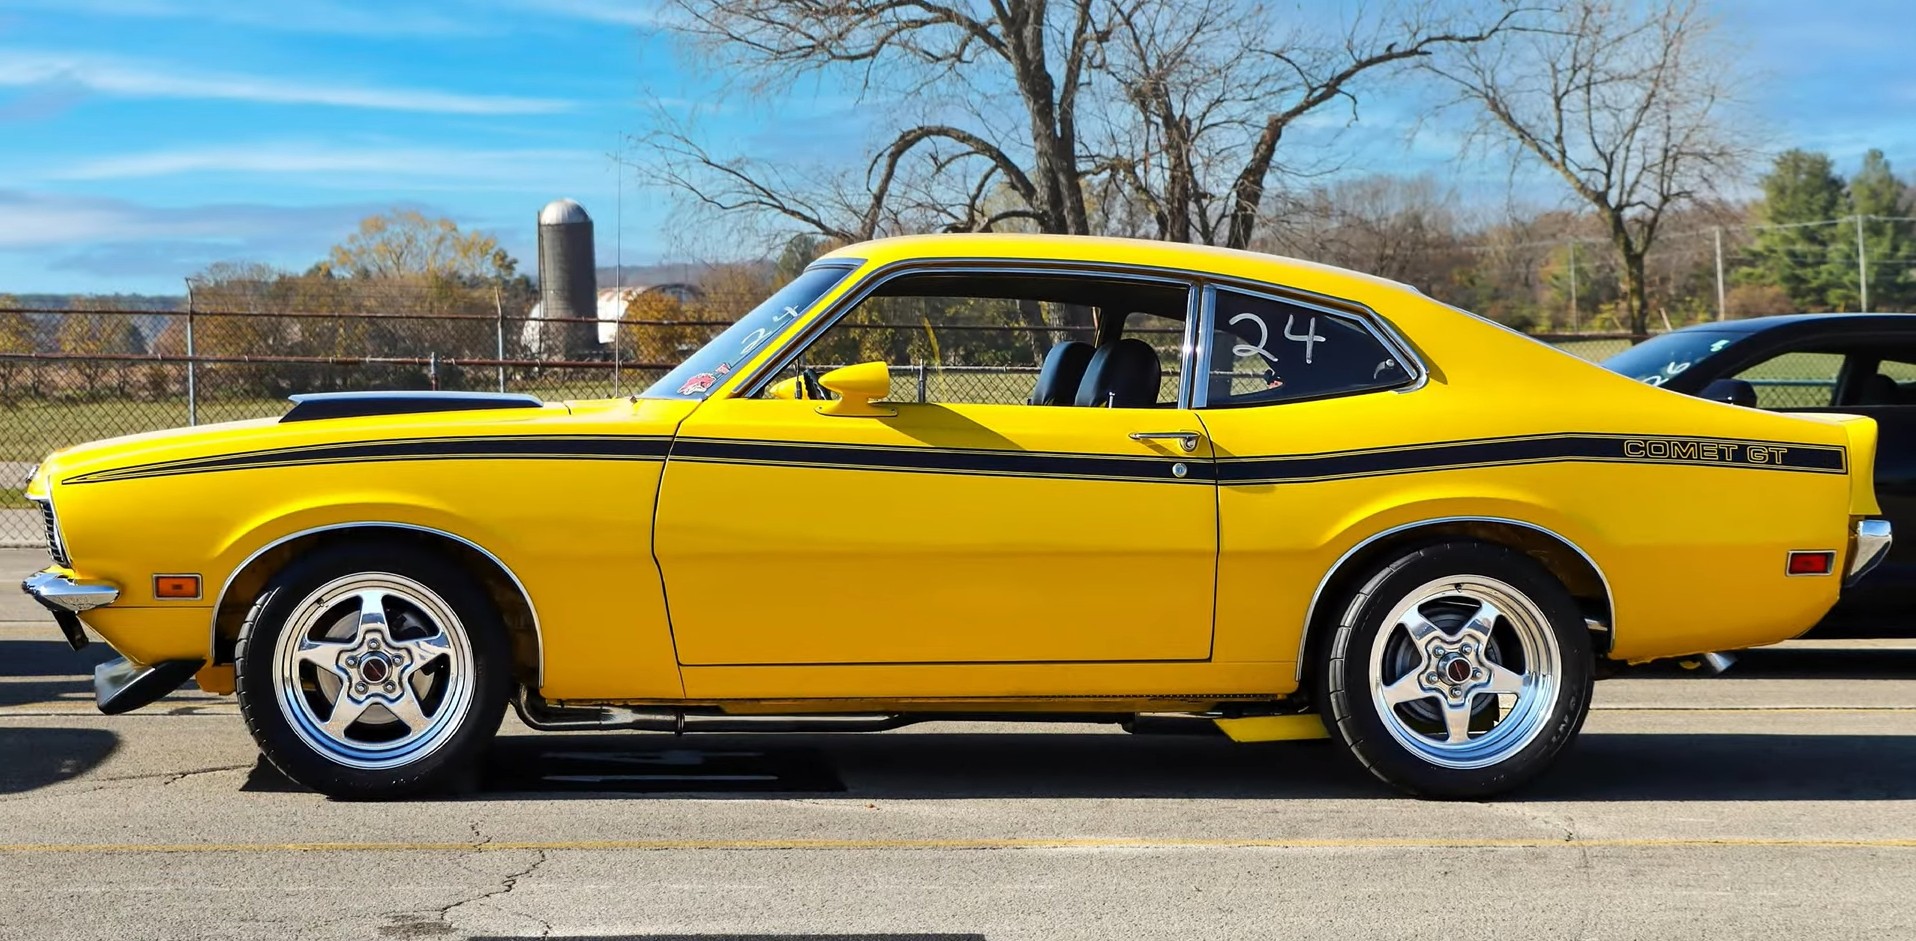 1973 Mercury Comet Is an Unassuming Sleeper With a Nasty Surprise Under the Hood - autoevolution